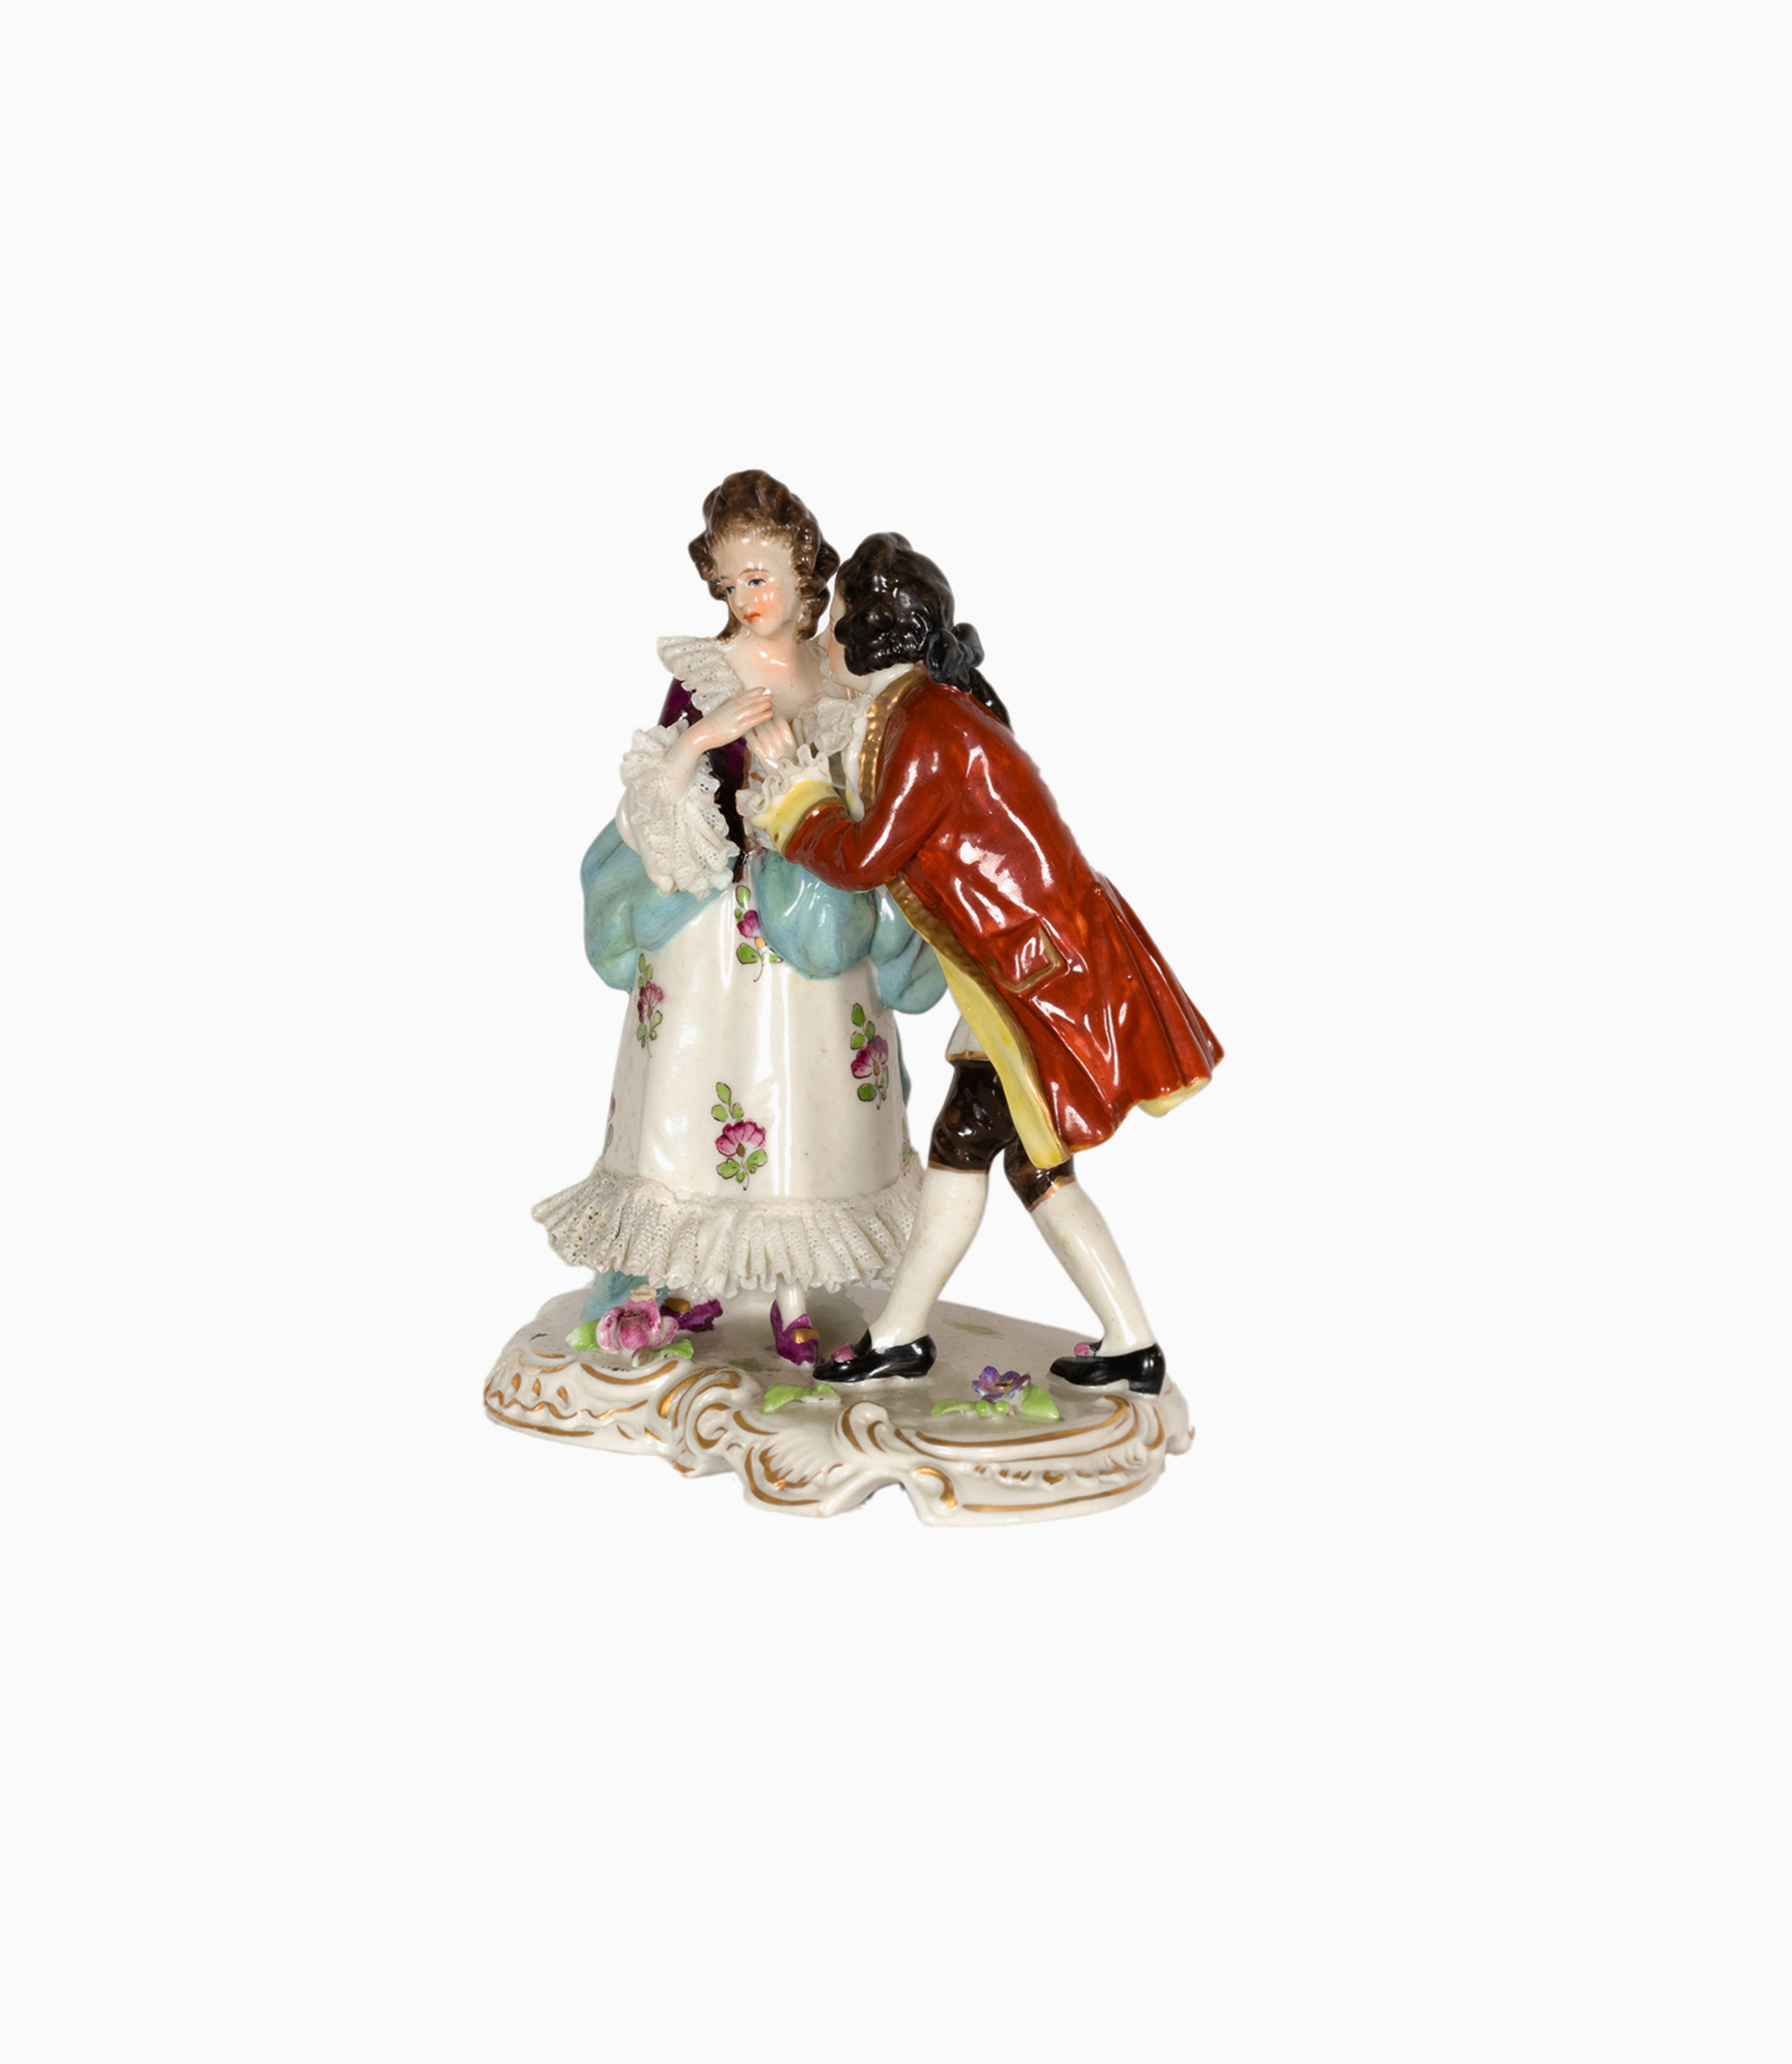 German Porcelain Figurine Of Loving Couple, Volkstedt, 19th Century  For Sale 2